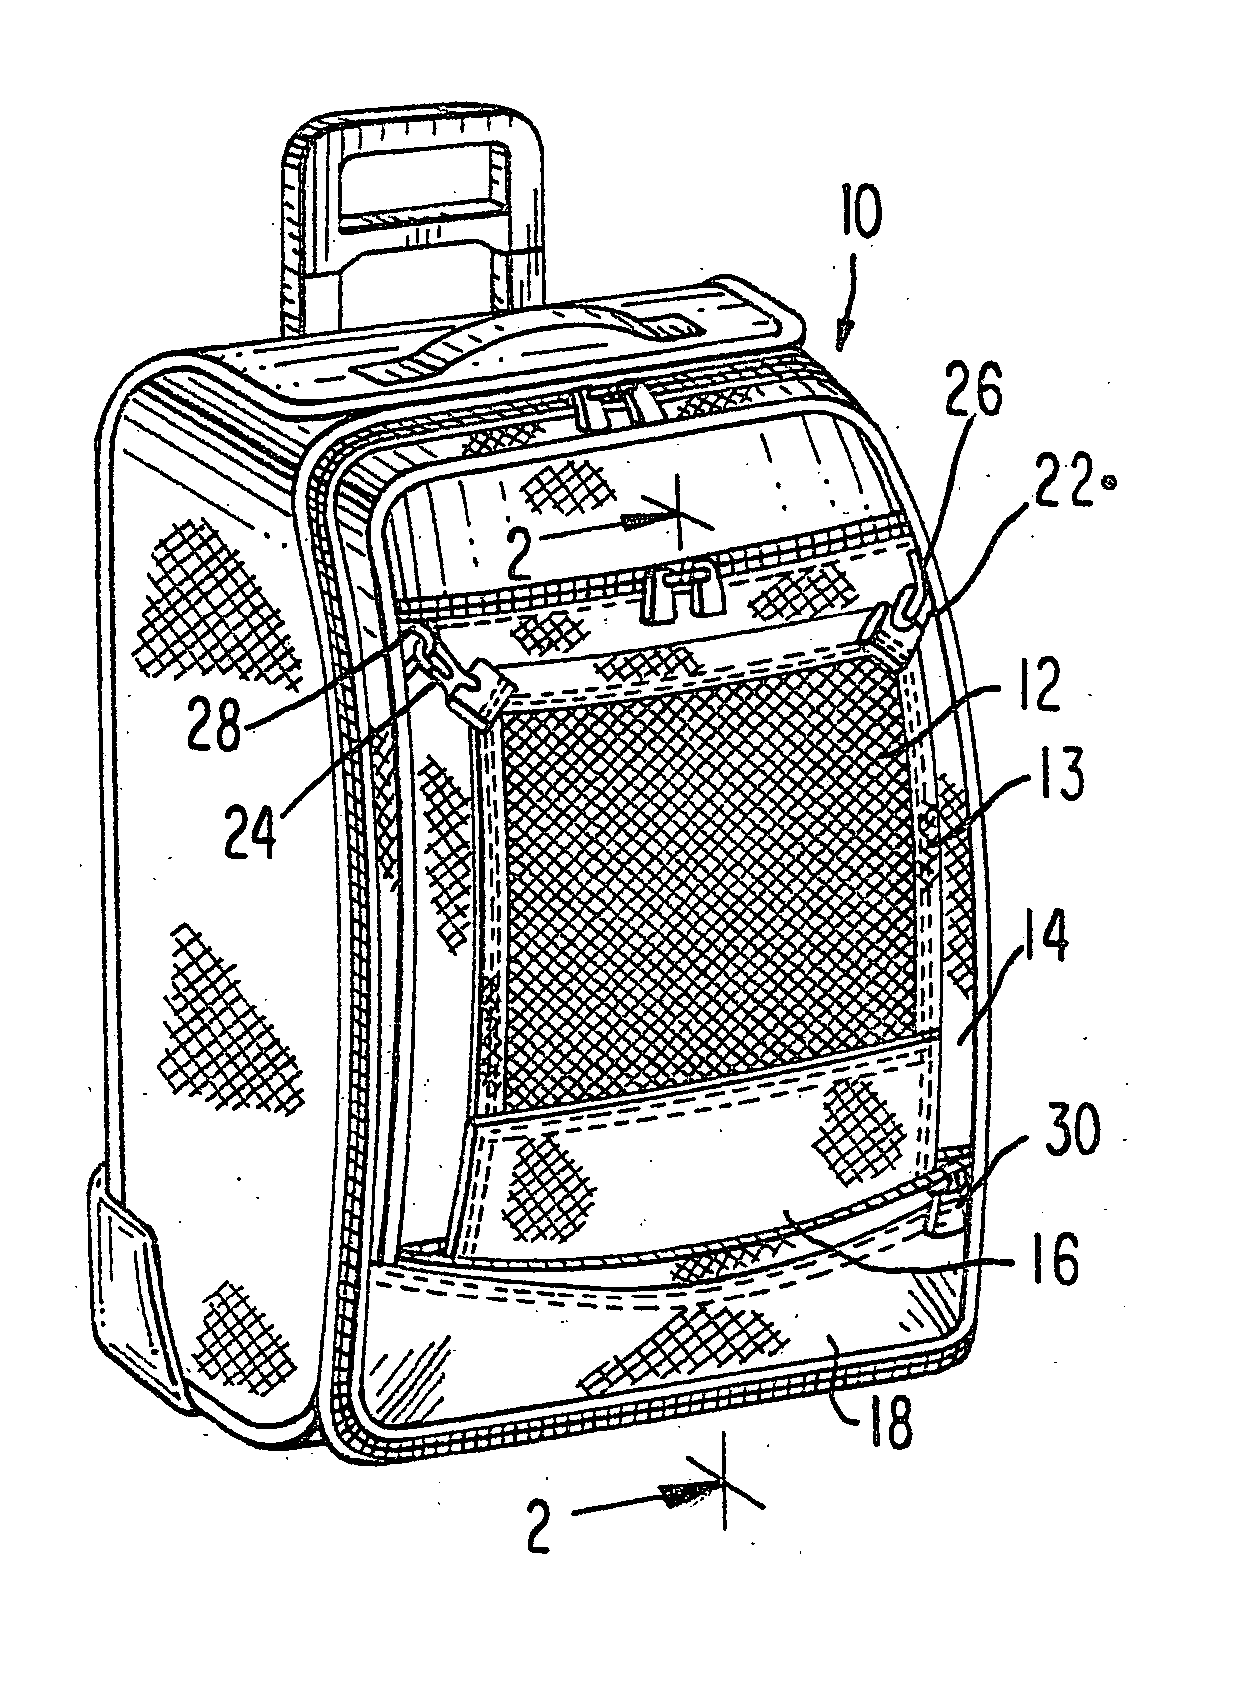 Concealable stretch panel for carrying loose items on luggage and the like